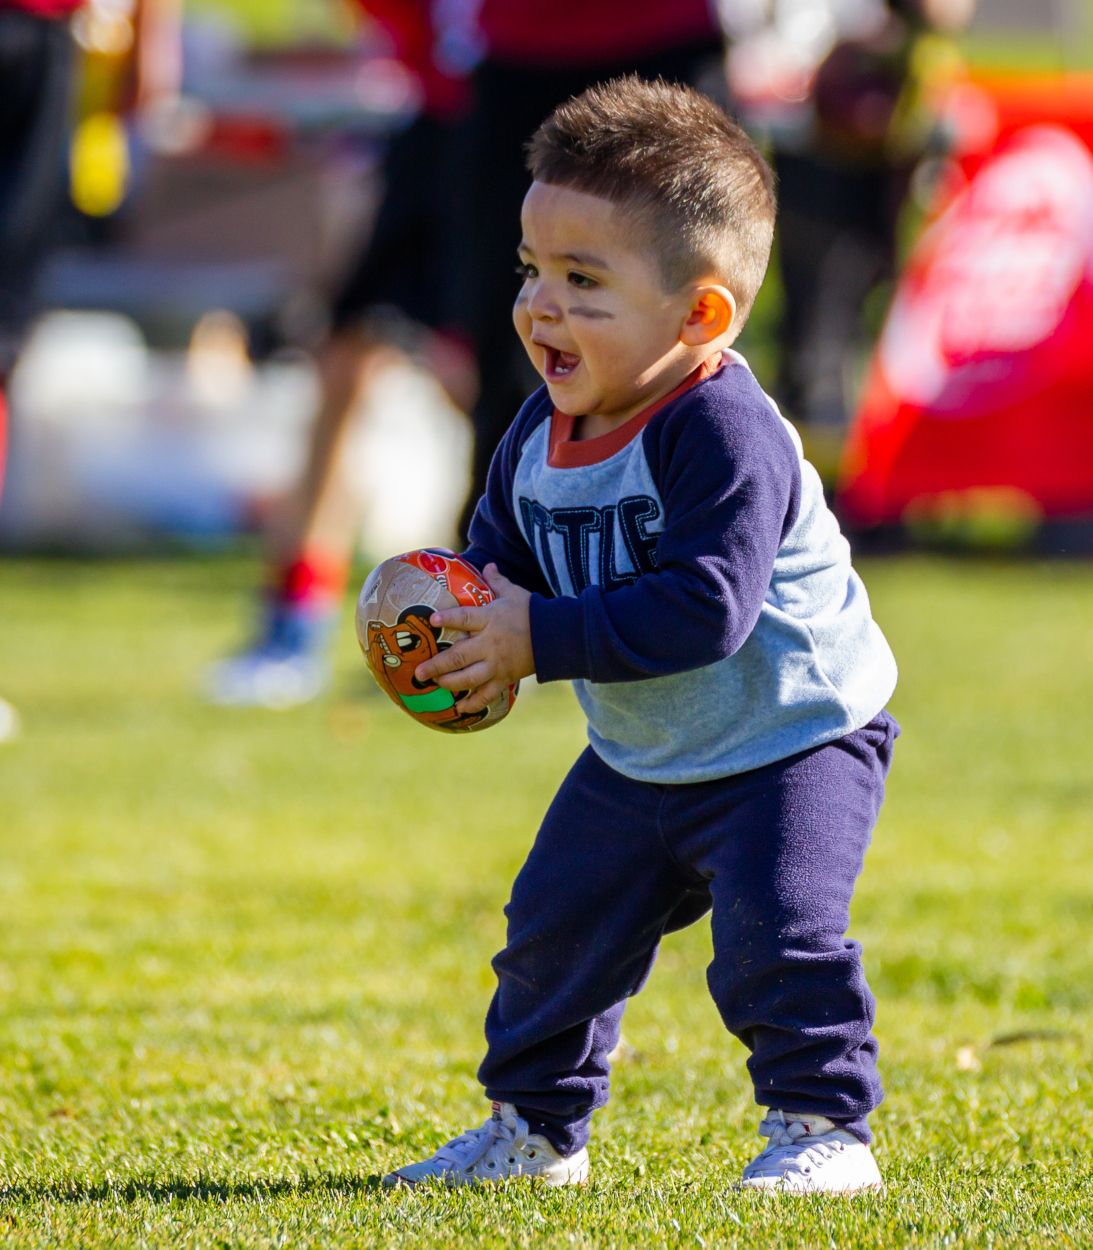 A small boy holding a ball while standing on the field.